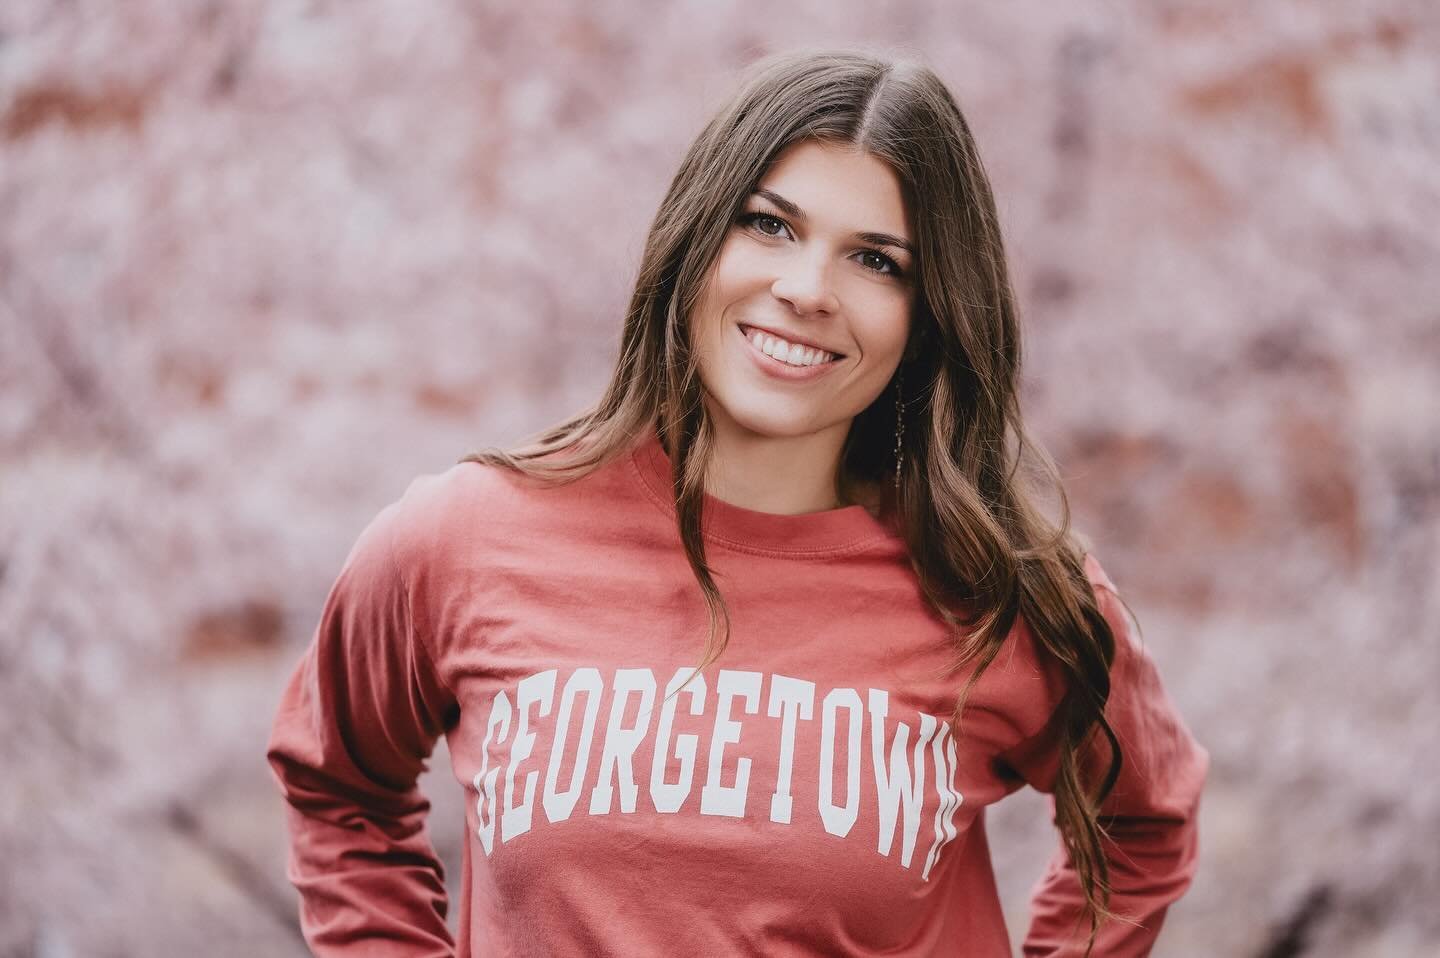 Calling all Class of 2024 Seniors.  For the first time I am offering College Swag  Mini Sessions.  Celebrate your college acceptances and high school achievements with a fun and quick mini session with your besties.
📷 What: 20 minute photo session f